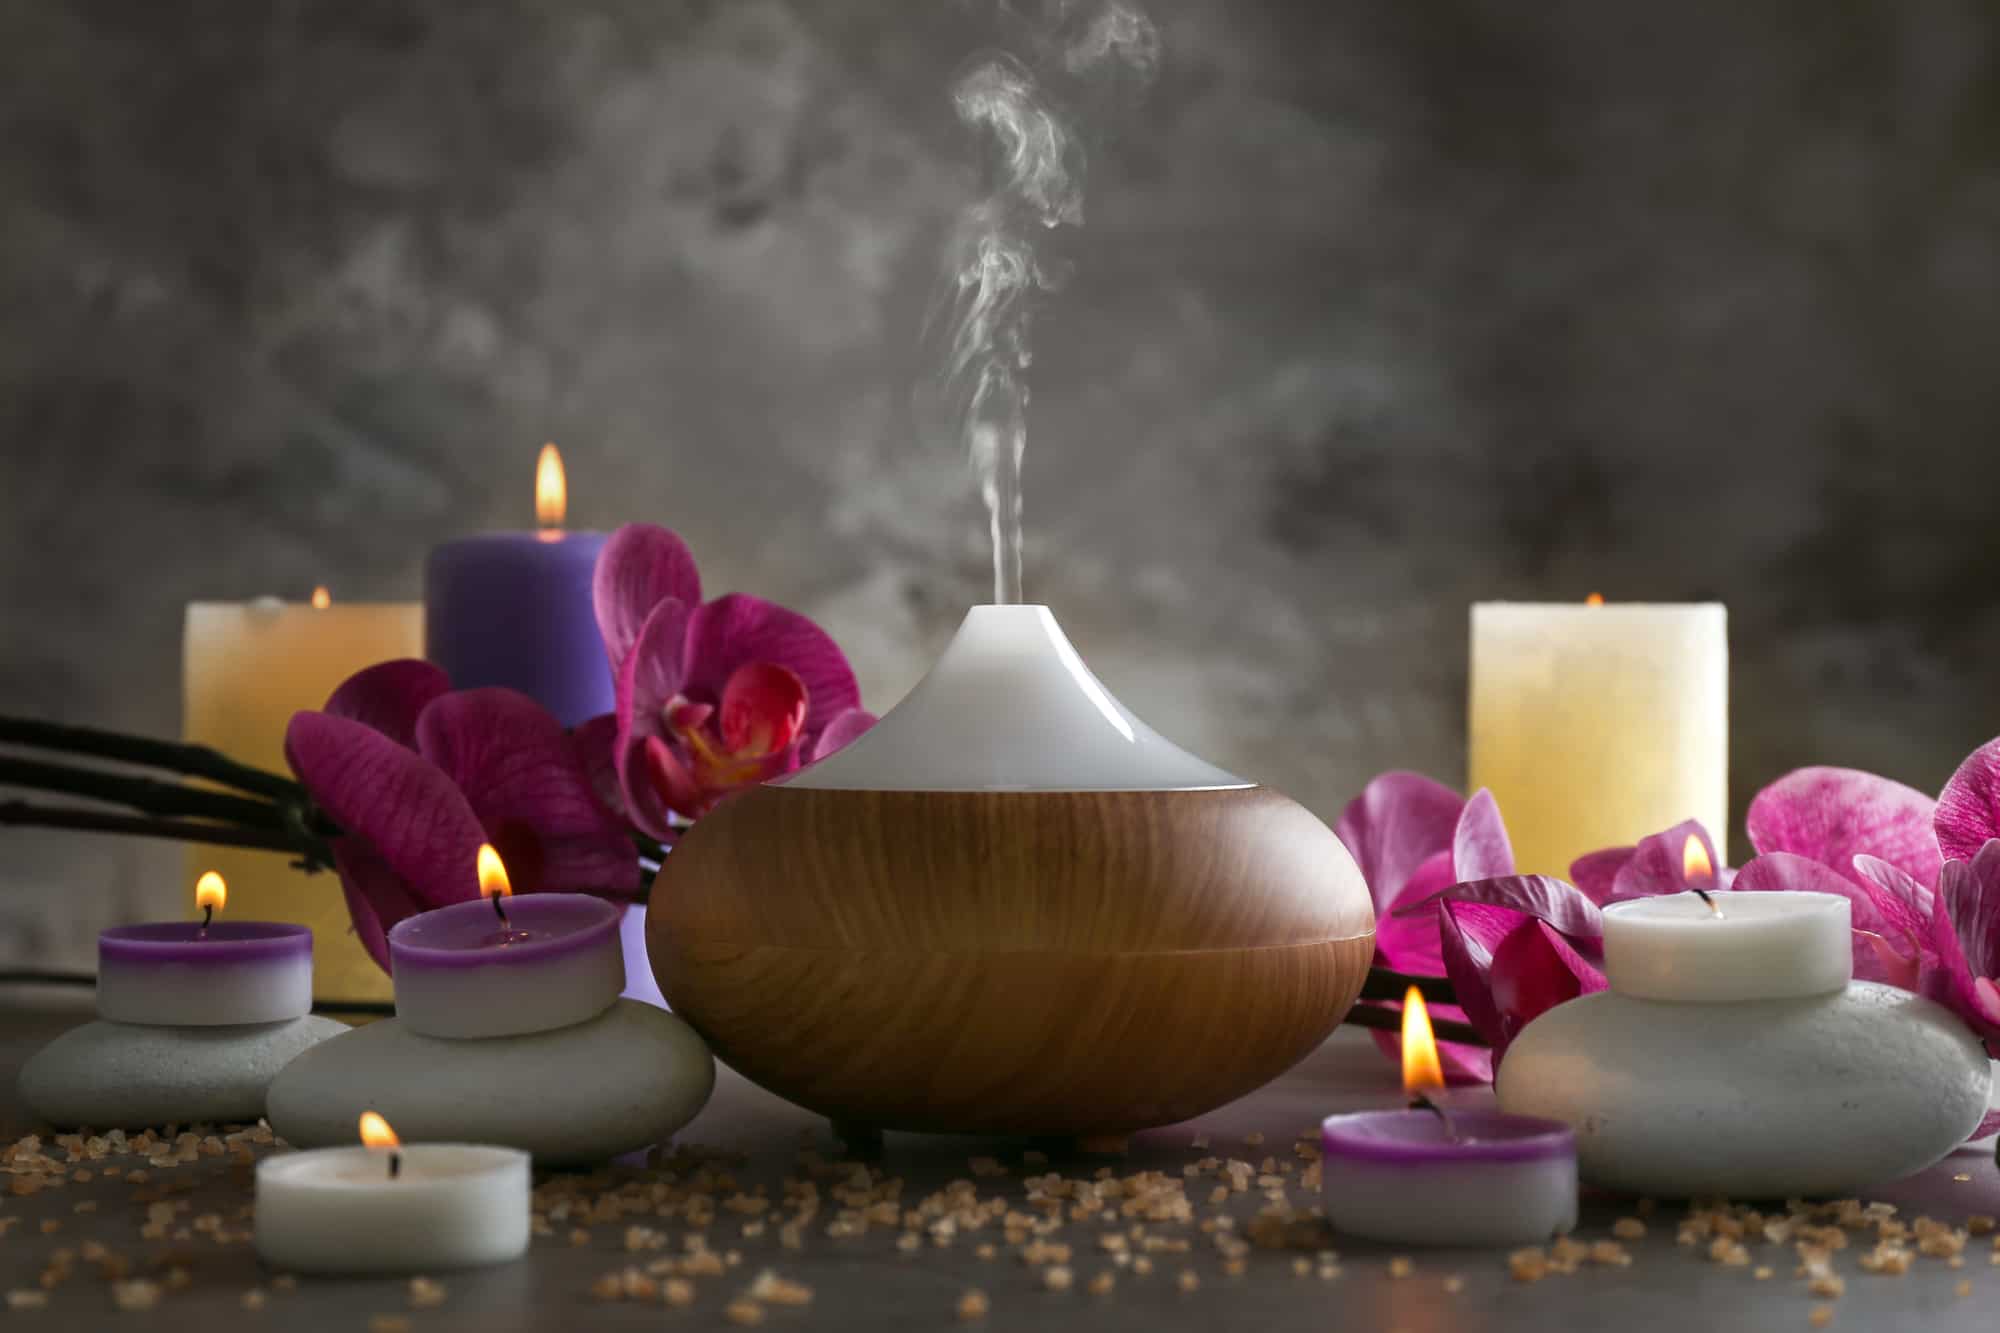 What Are Some Notable Aspects To Consider Before Buying an Essential Oil Diffuser?